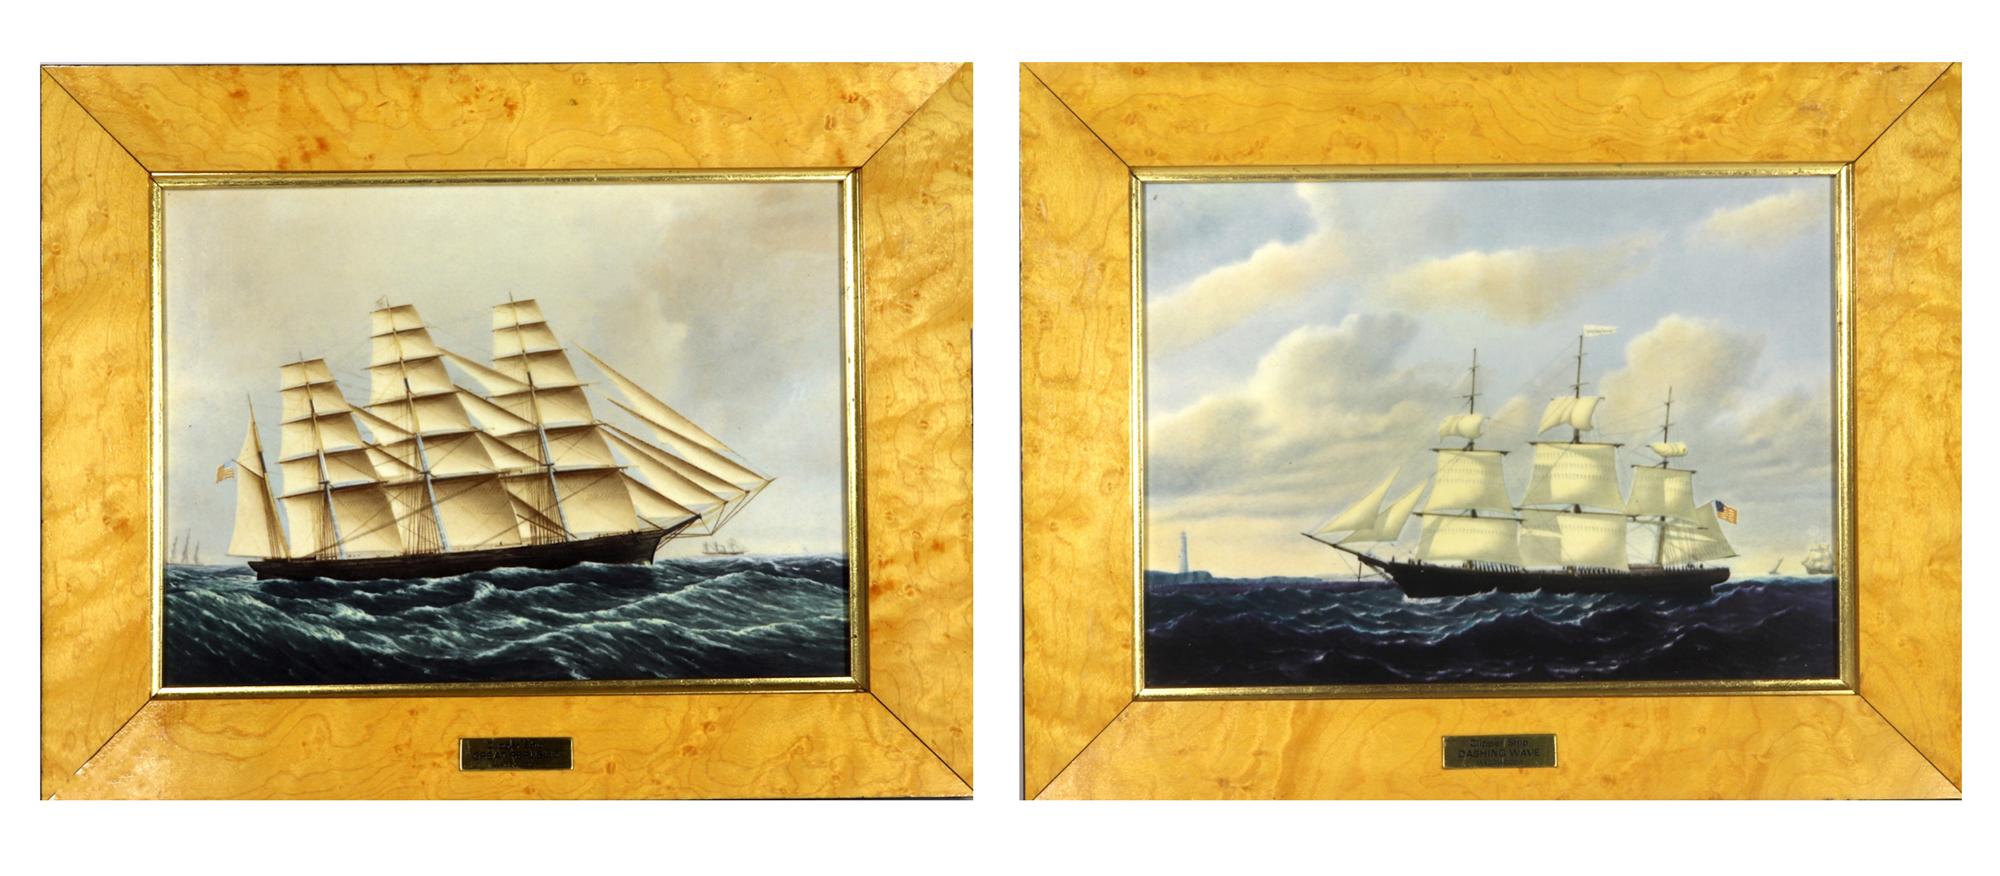 Wedgwood Porcelain Plaques of the Ships the Great Republic and the Dashing Wave For Sale 3